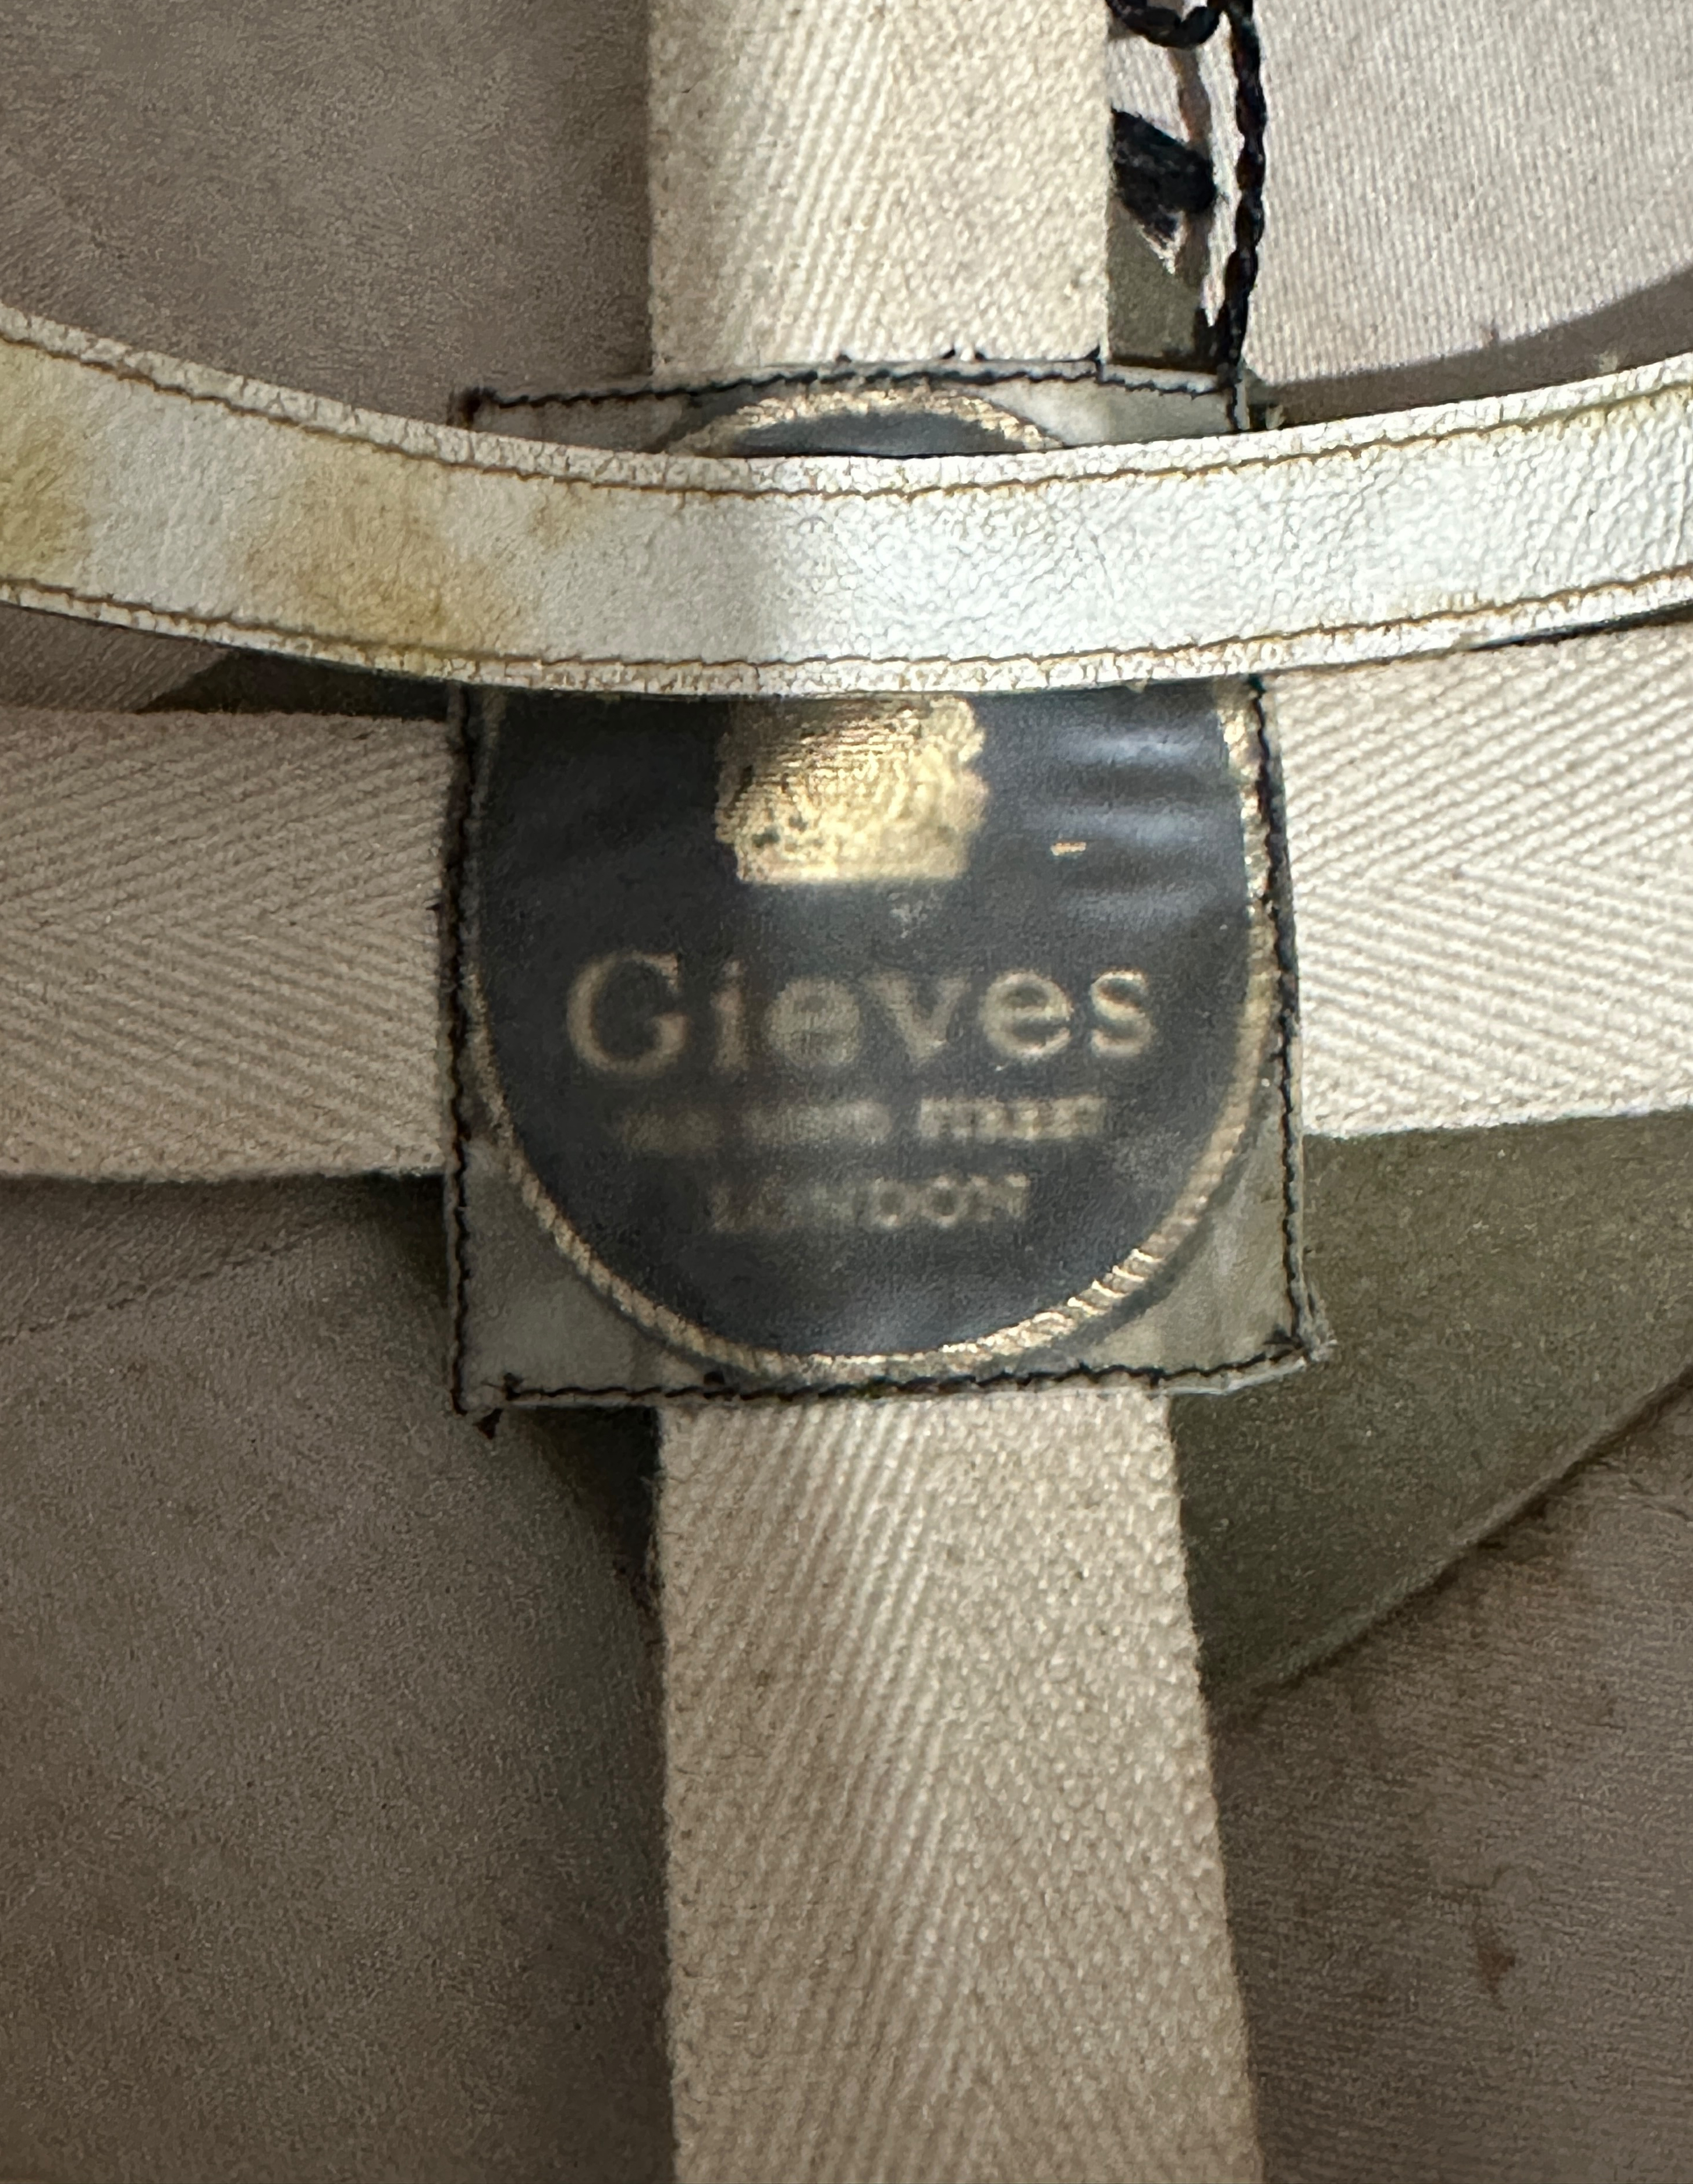 Antique Gieves Bond St London Pith Helmet and Bowler Hat. - Image 3 of 5